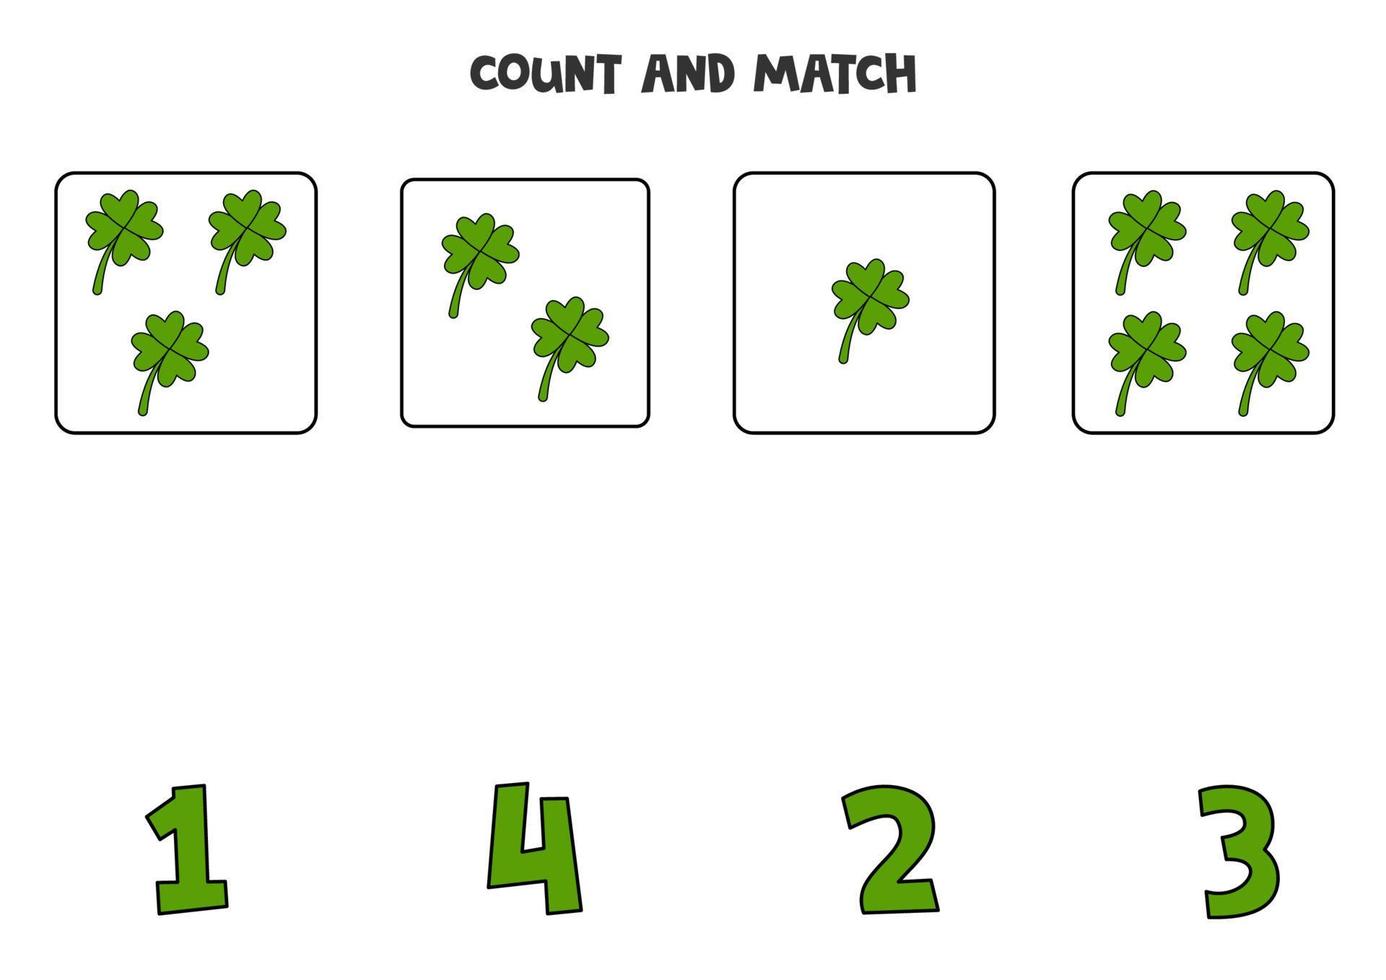 Counting game for kids. Count all shamrocks and match with number. Worksheet for children. vector